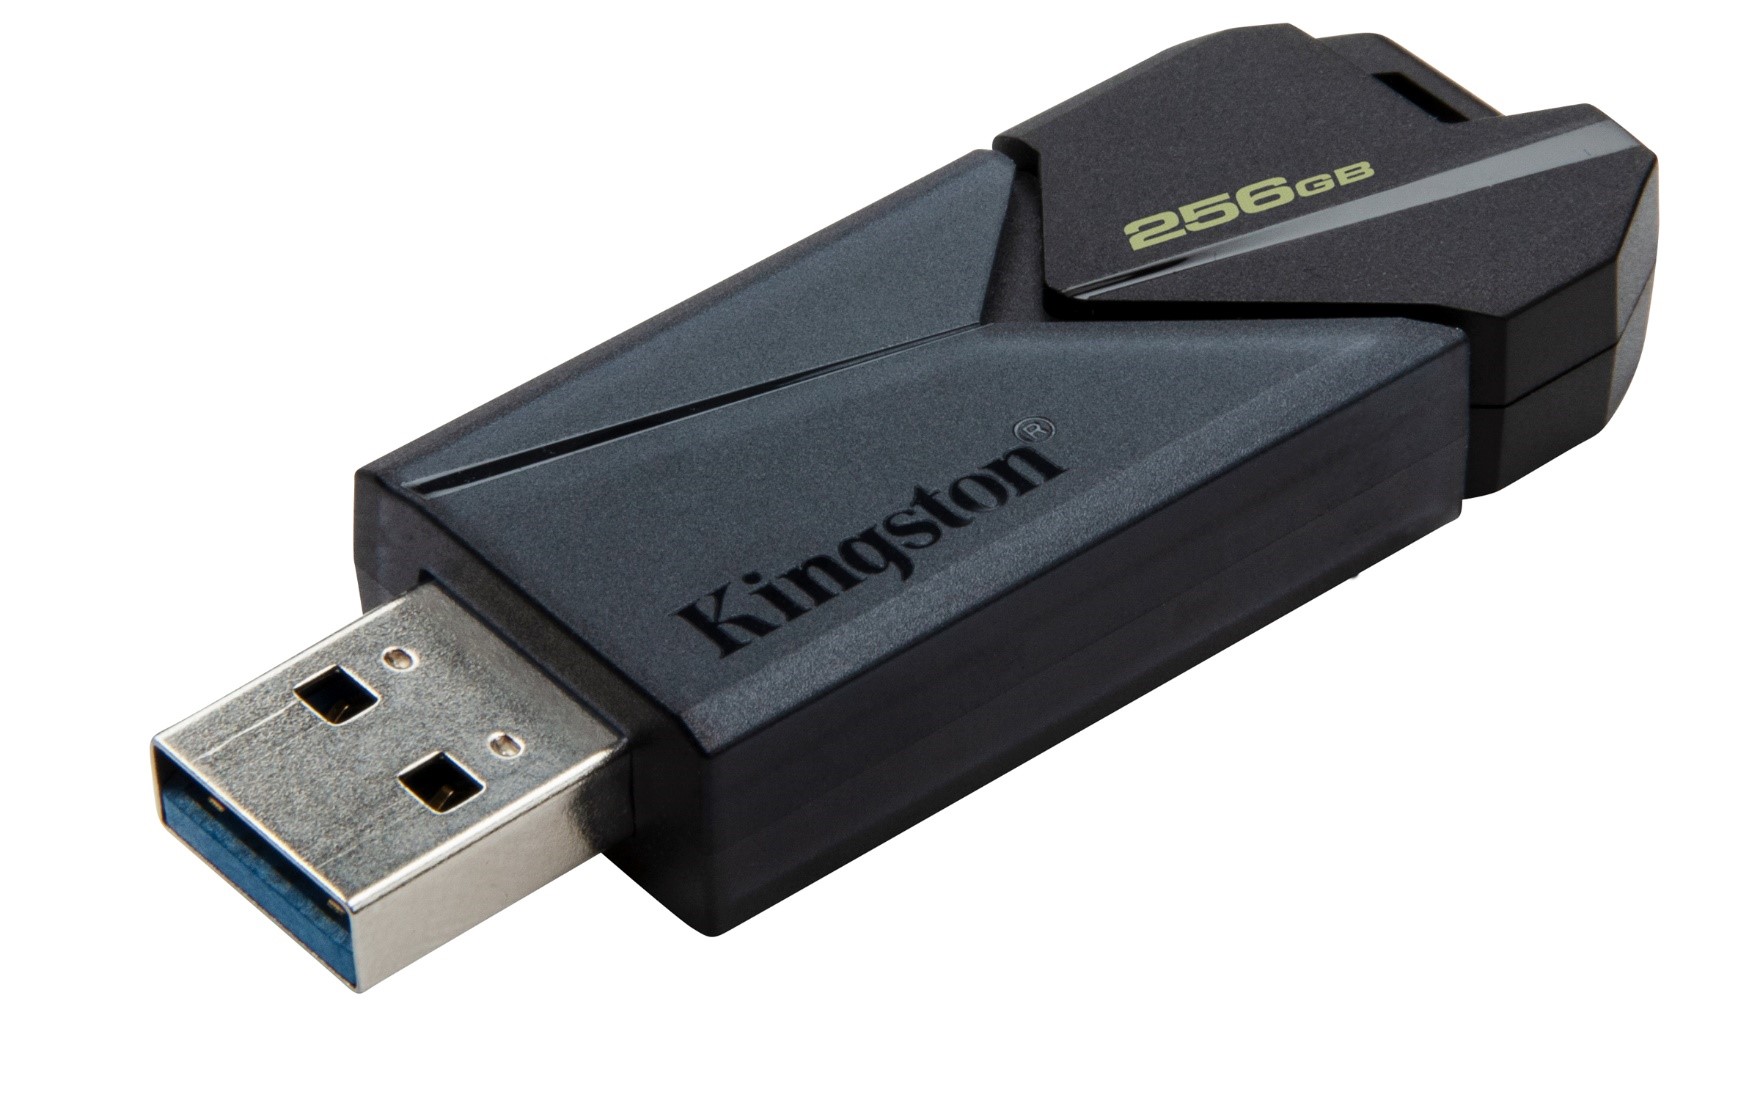 Kingston Launches Two New DataTraveler for Users On-the-Go - returnal